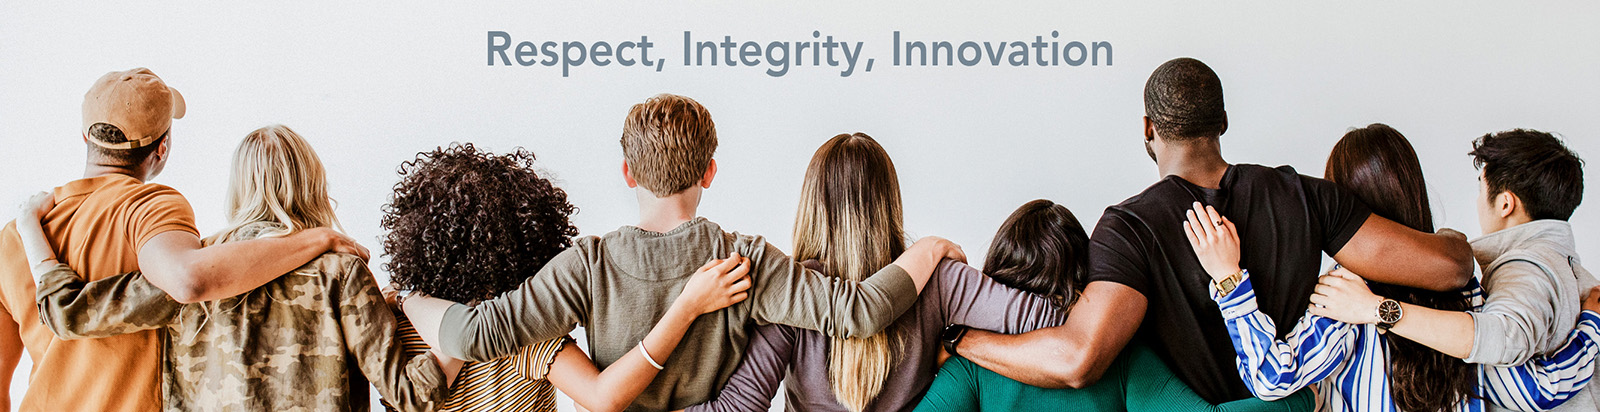 Tandia - Repsect Integrity Innovation